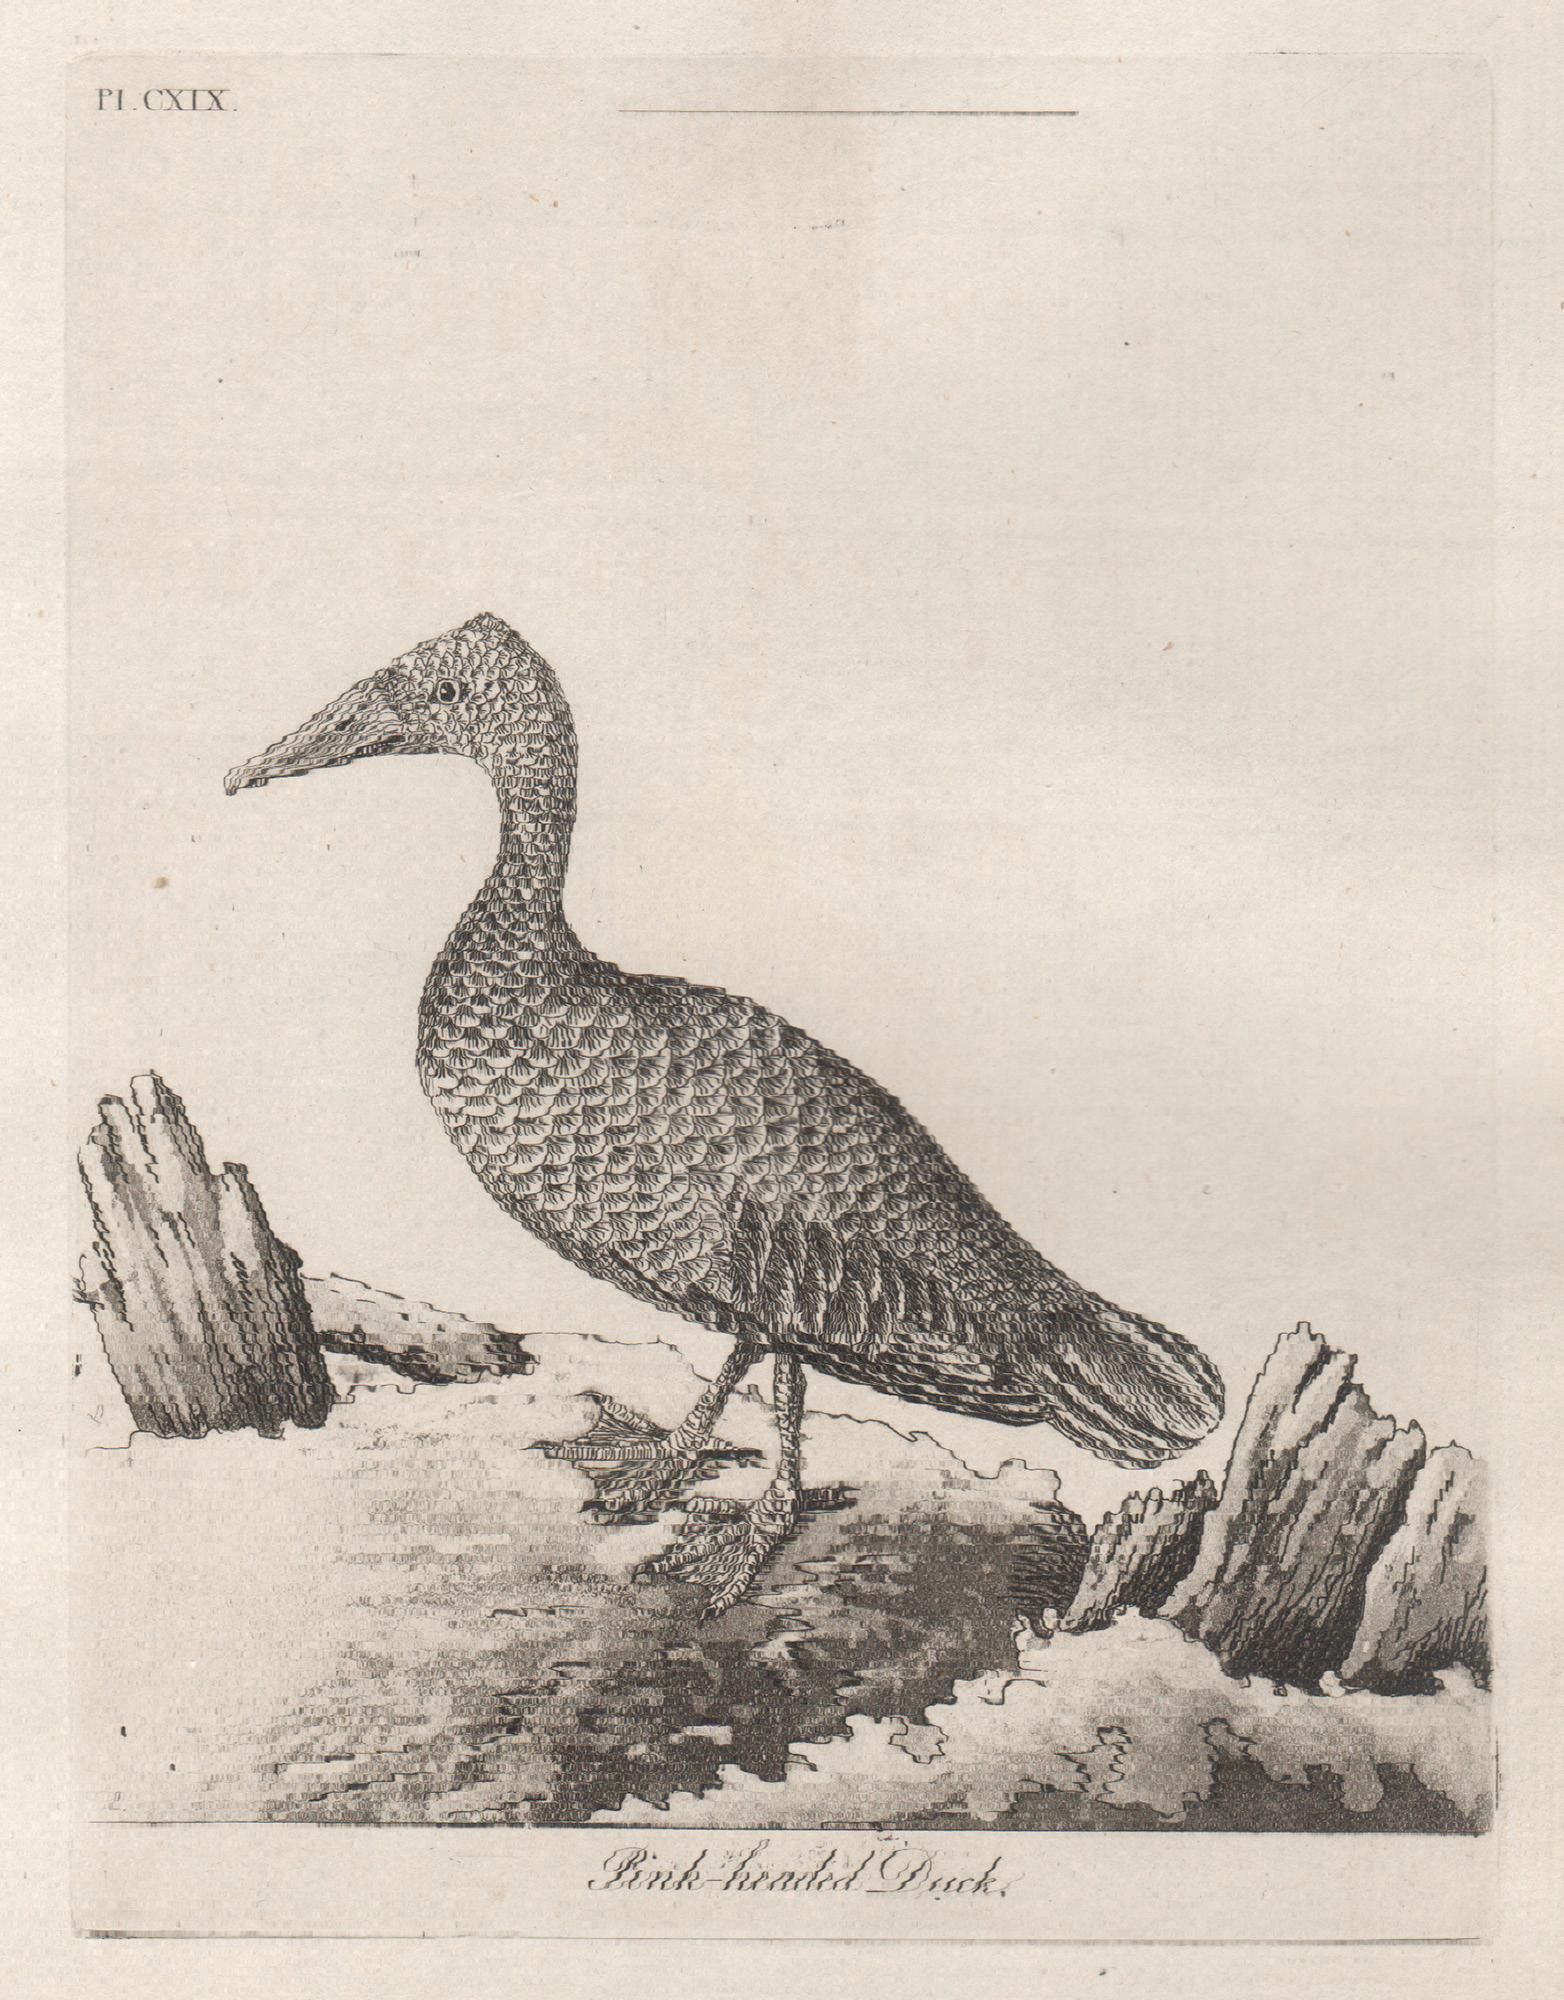 Copper-line engraving. 1781. From John Latham's 'General Synopsis of Birds' 1781-1785, and its Supplements. Plate number top left. Laid paper.

John Latham was the leading English ornithologist of his day.

175mm by 135mm (platemark) 
225mm by 180mm